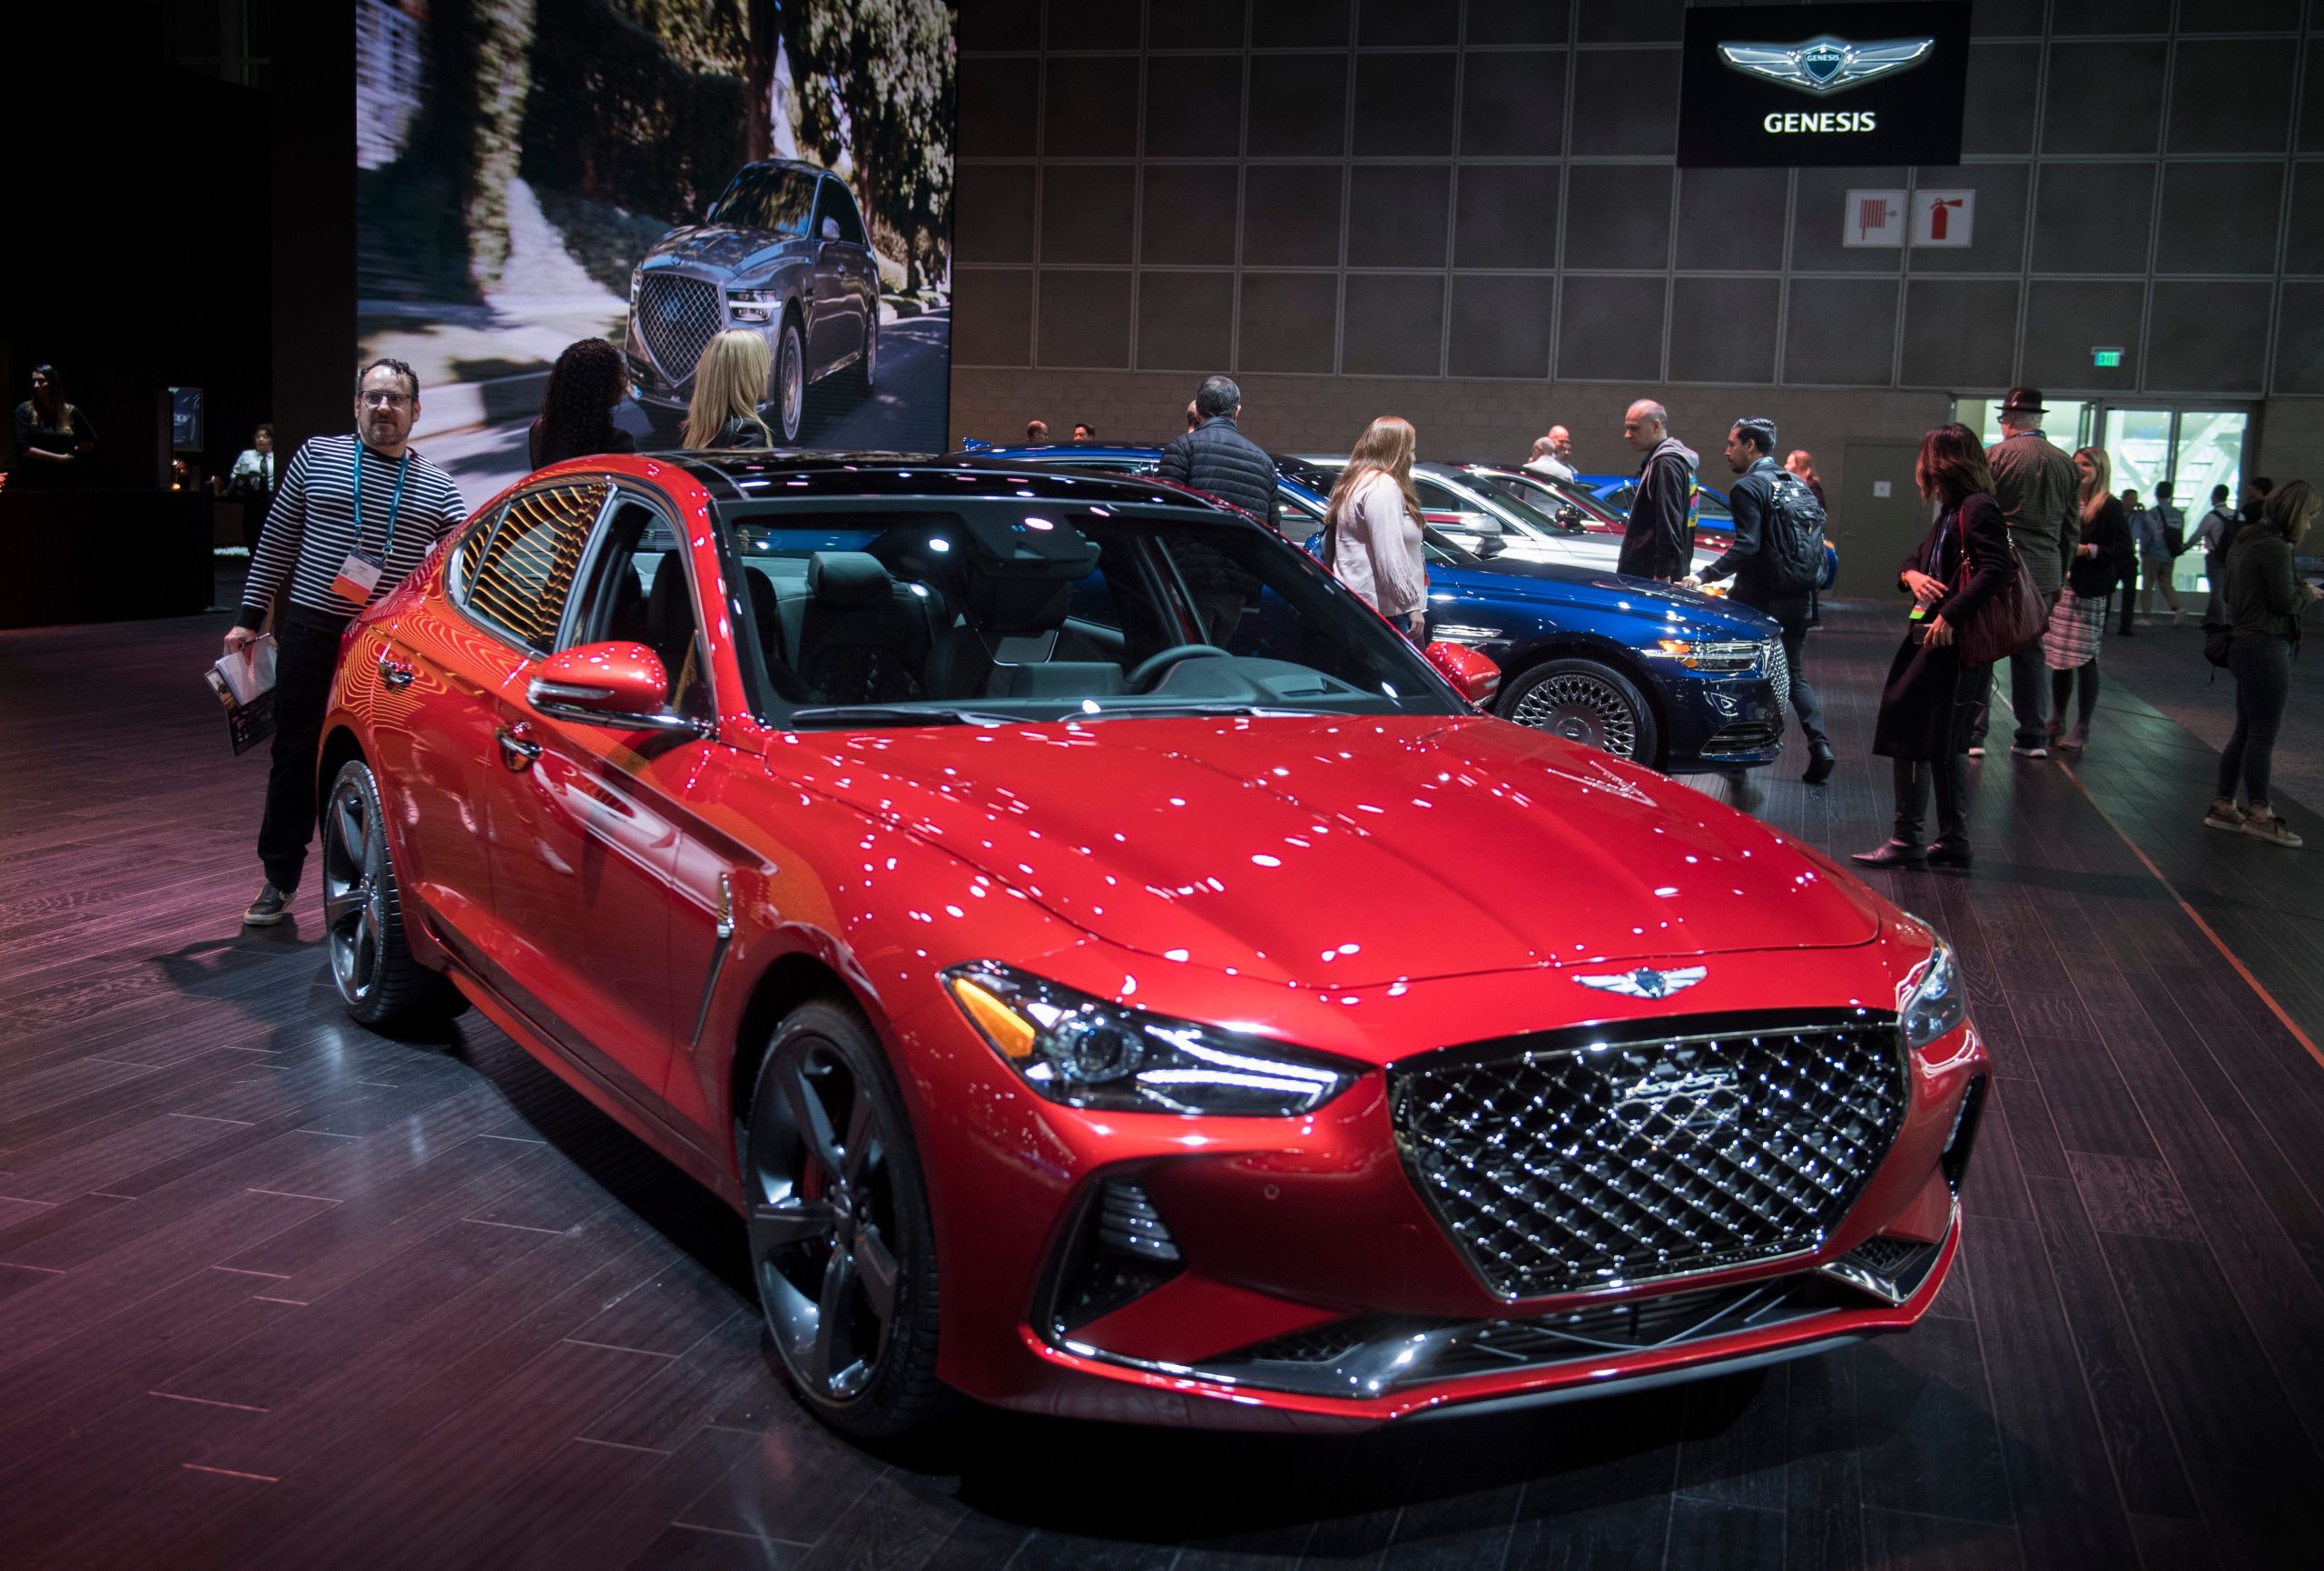 A Genesis G70 on display at an auto show